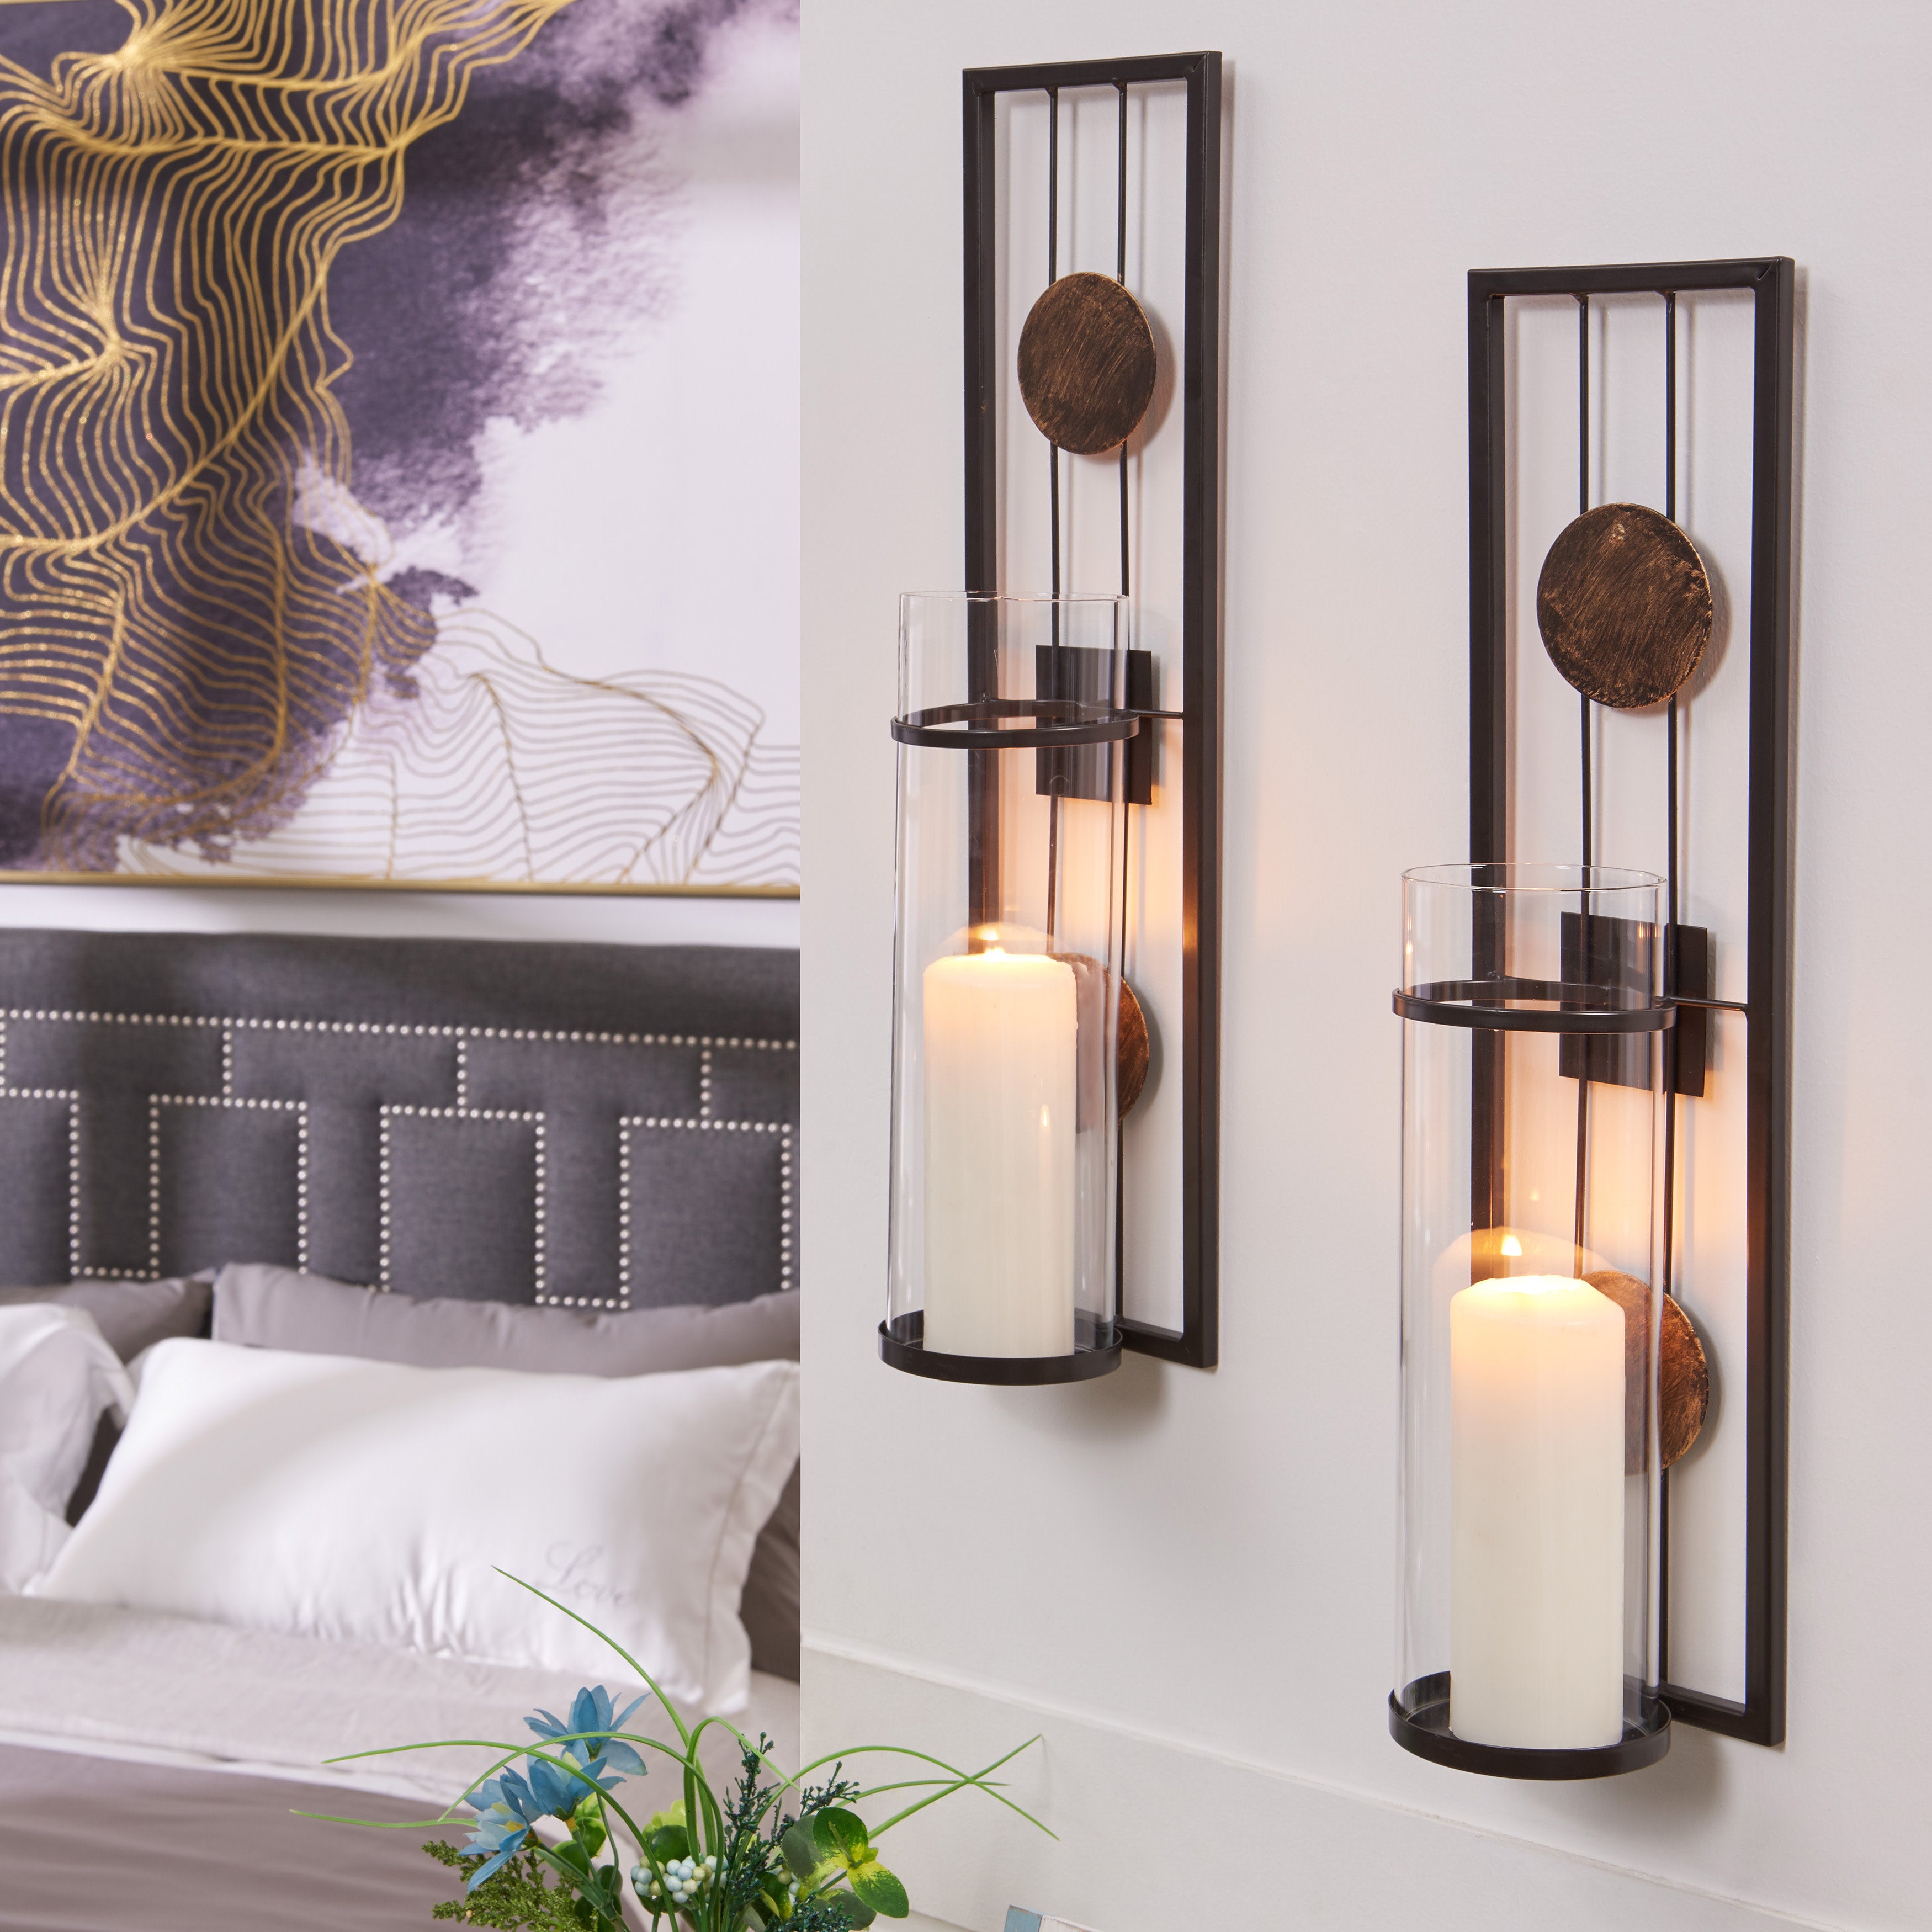 Extra Large Wall Sconces For Candles - TopDekoration.com